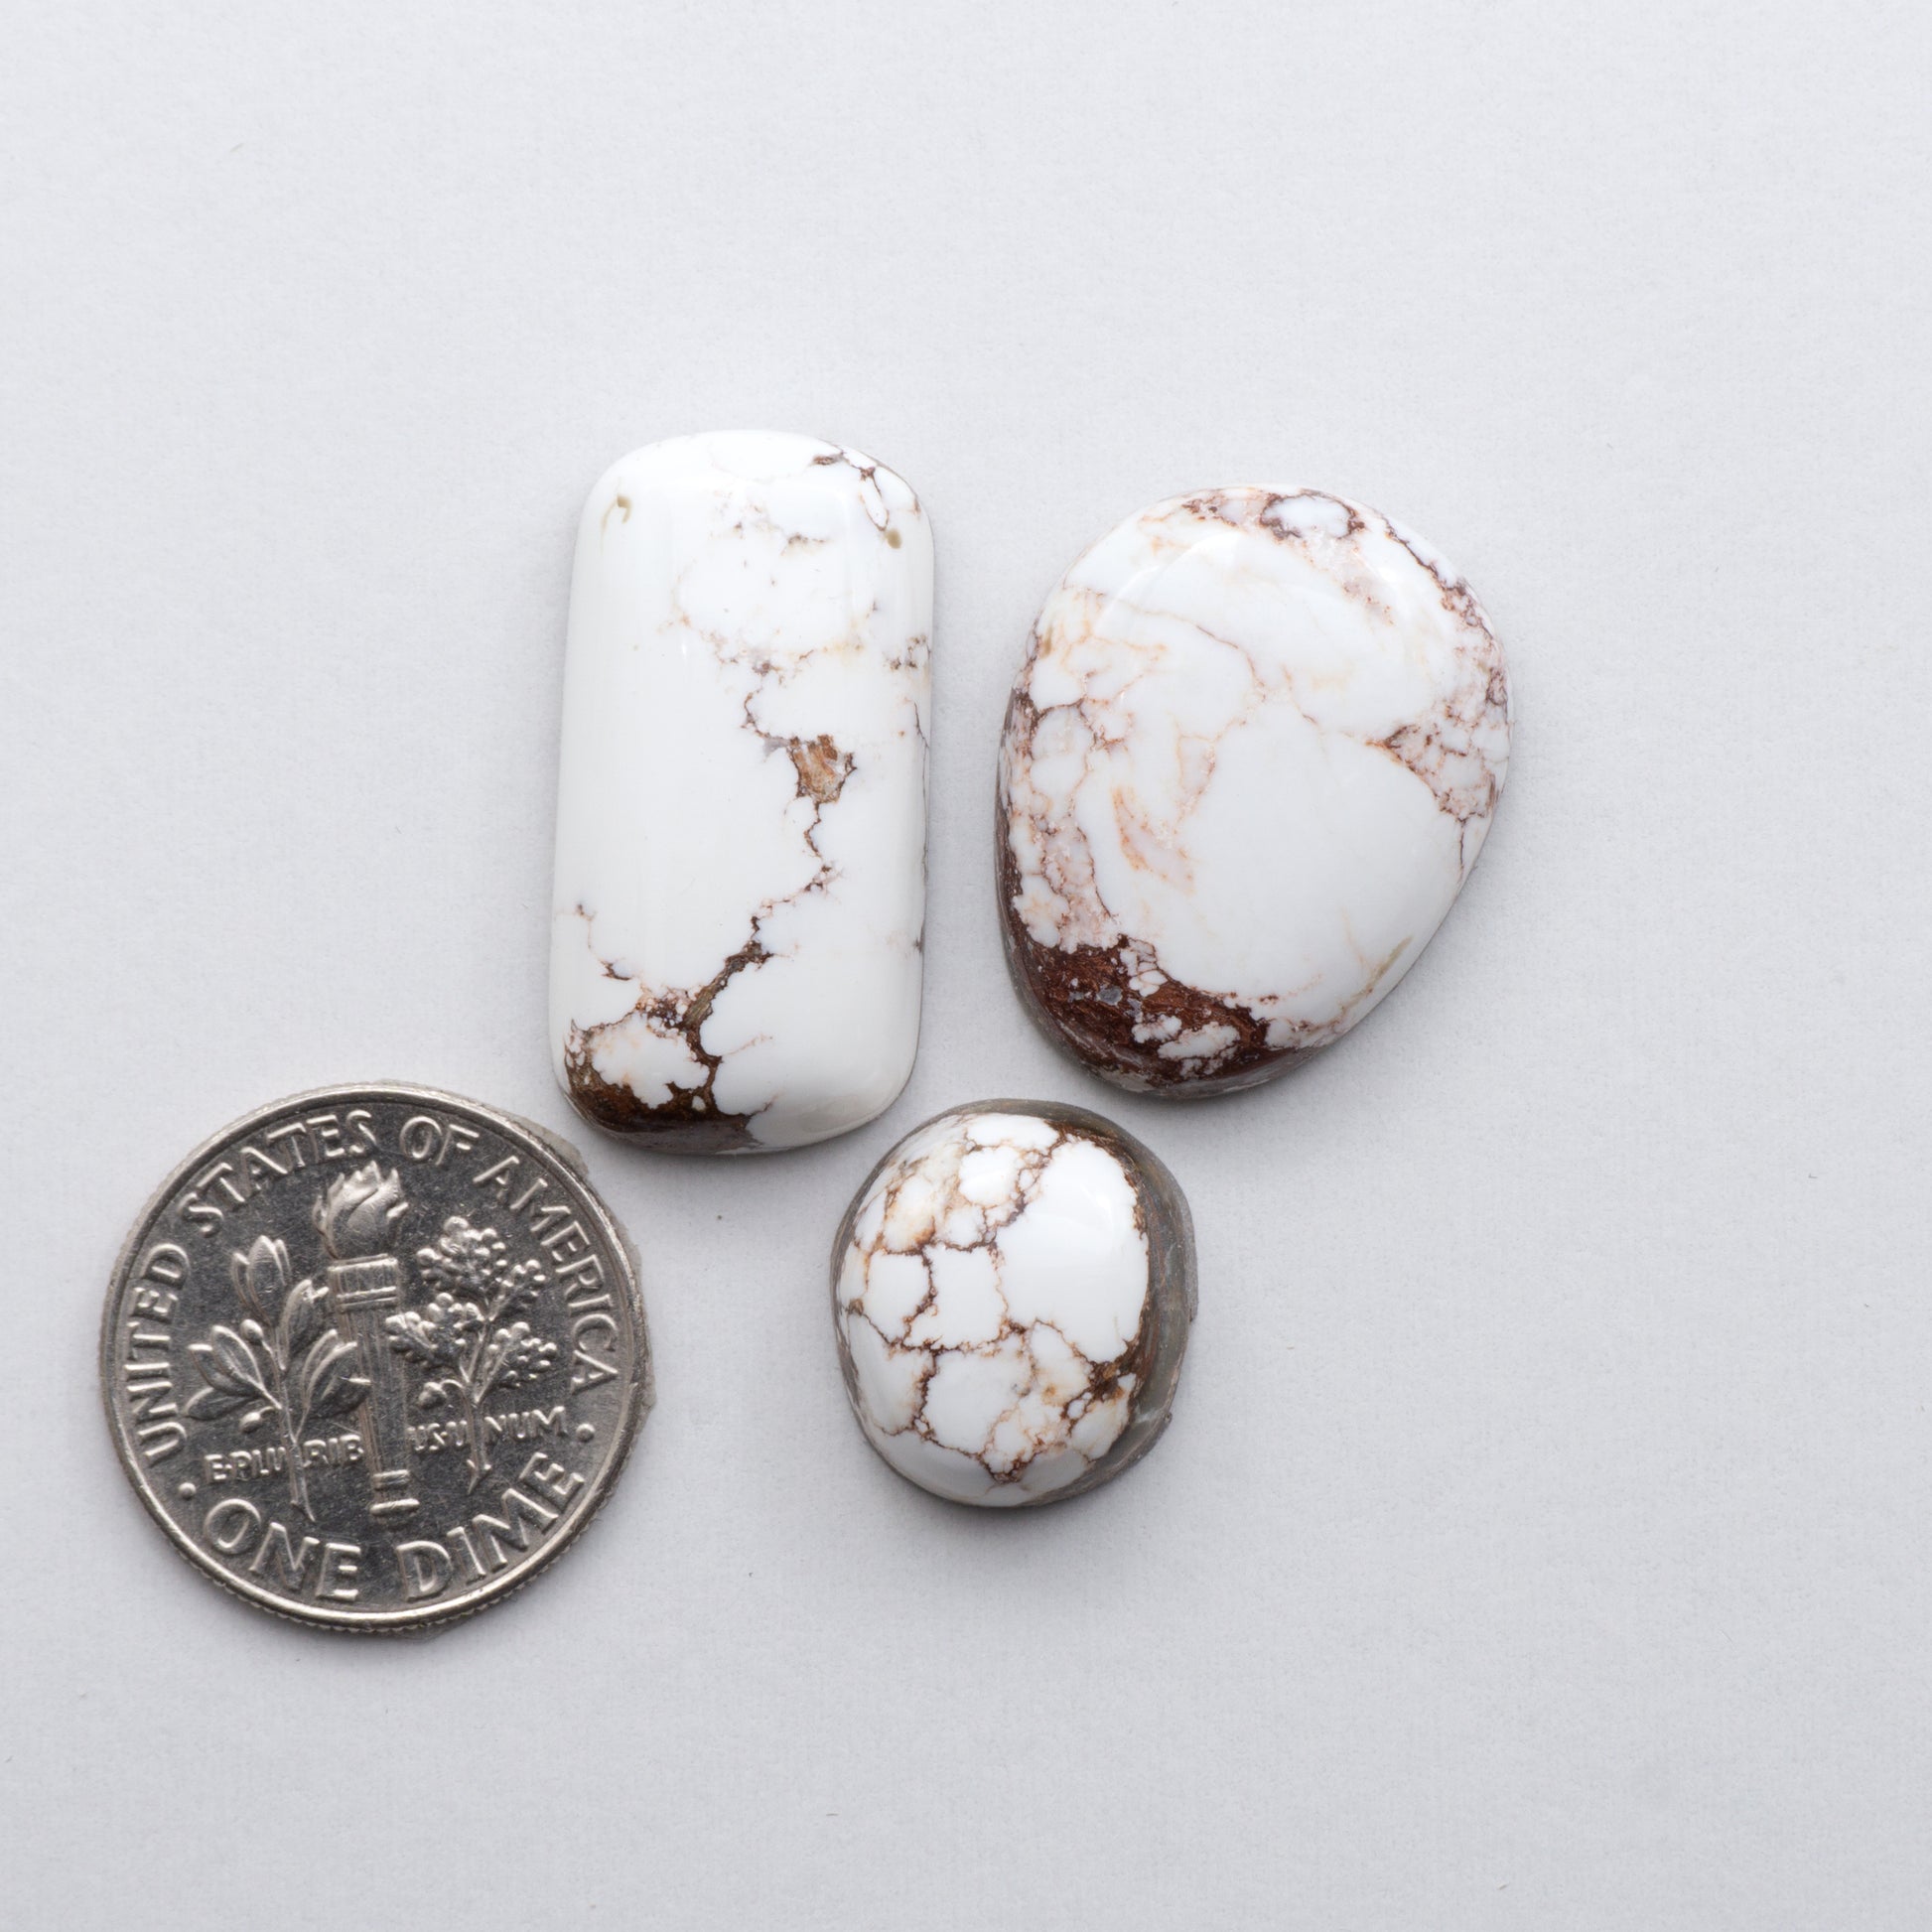 This stunning Wild Horse Cabochon lot is a magnificent addition to any collection.